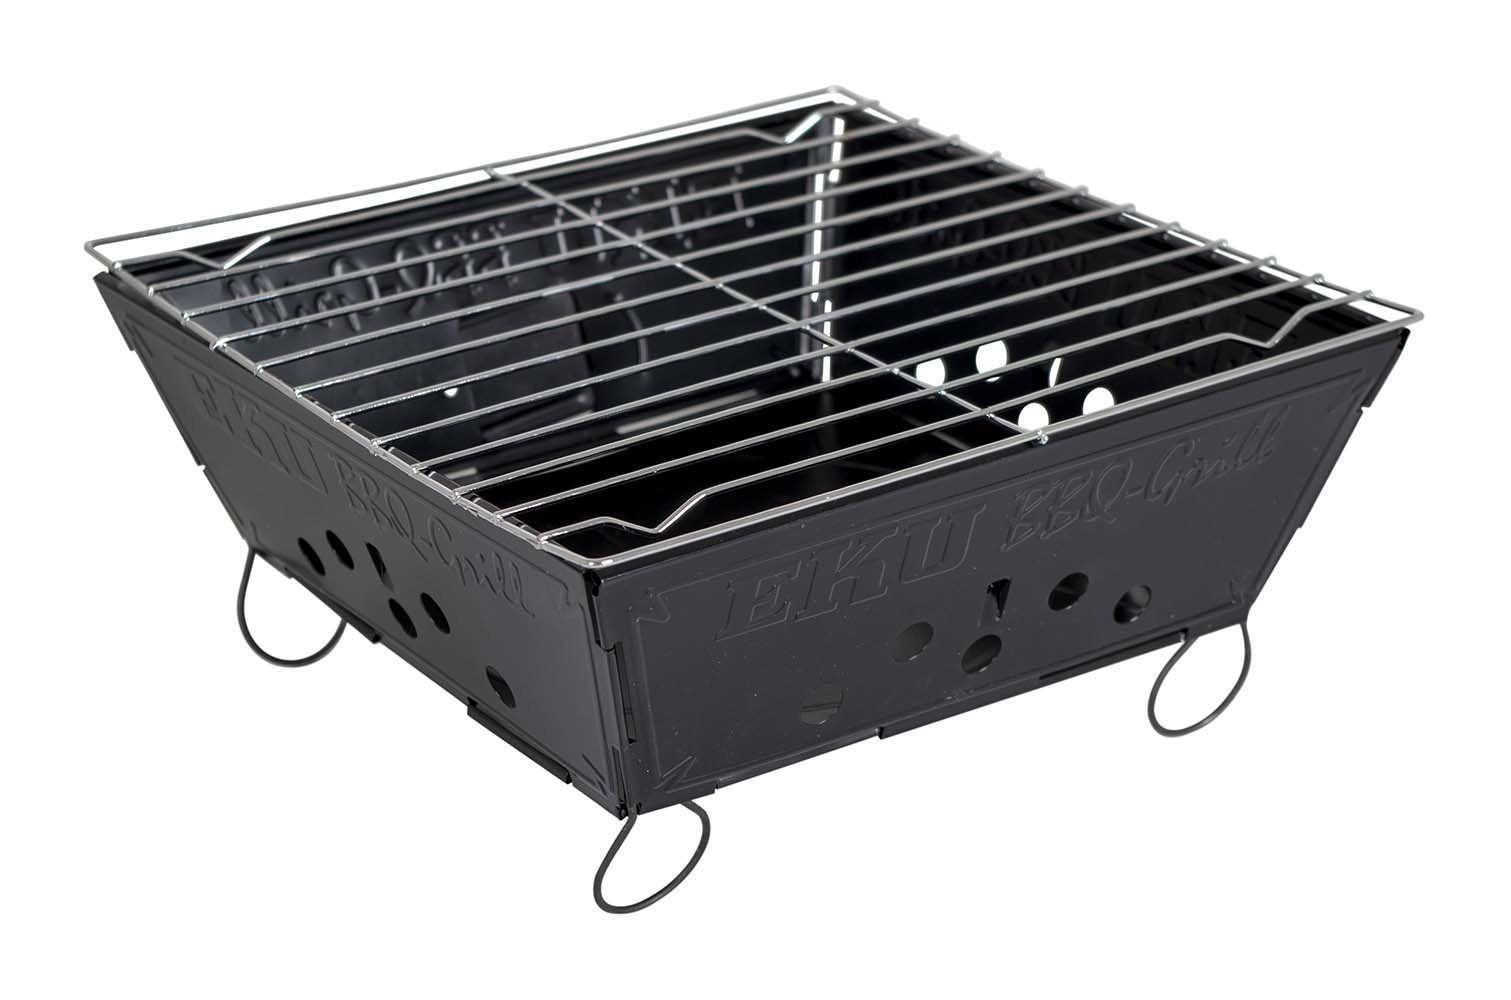 8108145 A barbecue that can be folded very flat. Because it fully retracts, this lightweight charcoal barbecue is easy to transport. Equipped with small openings for ventilation on the sides.